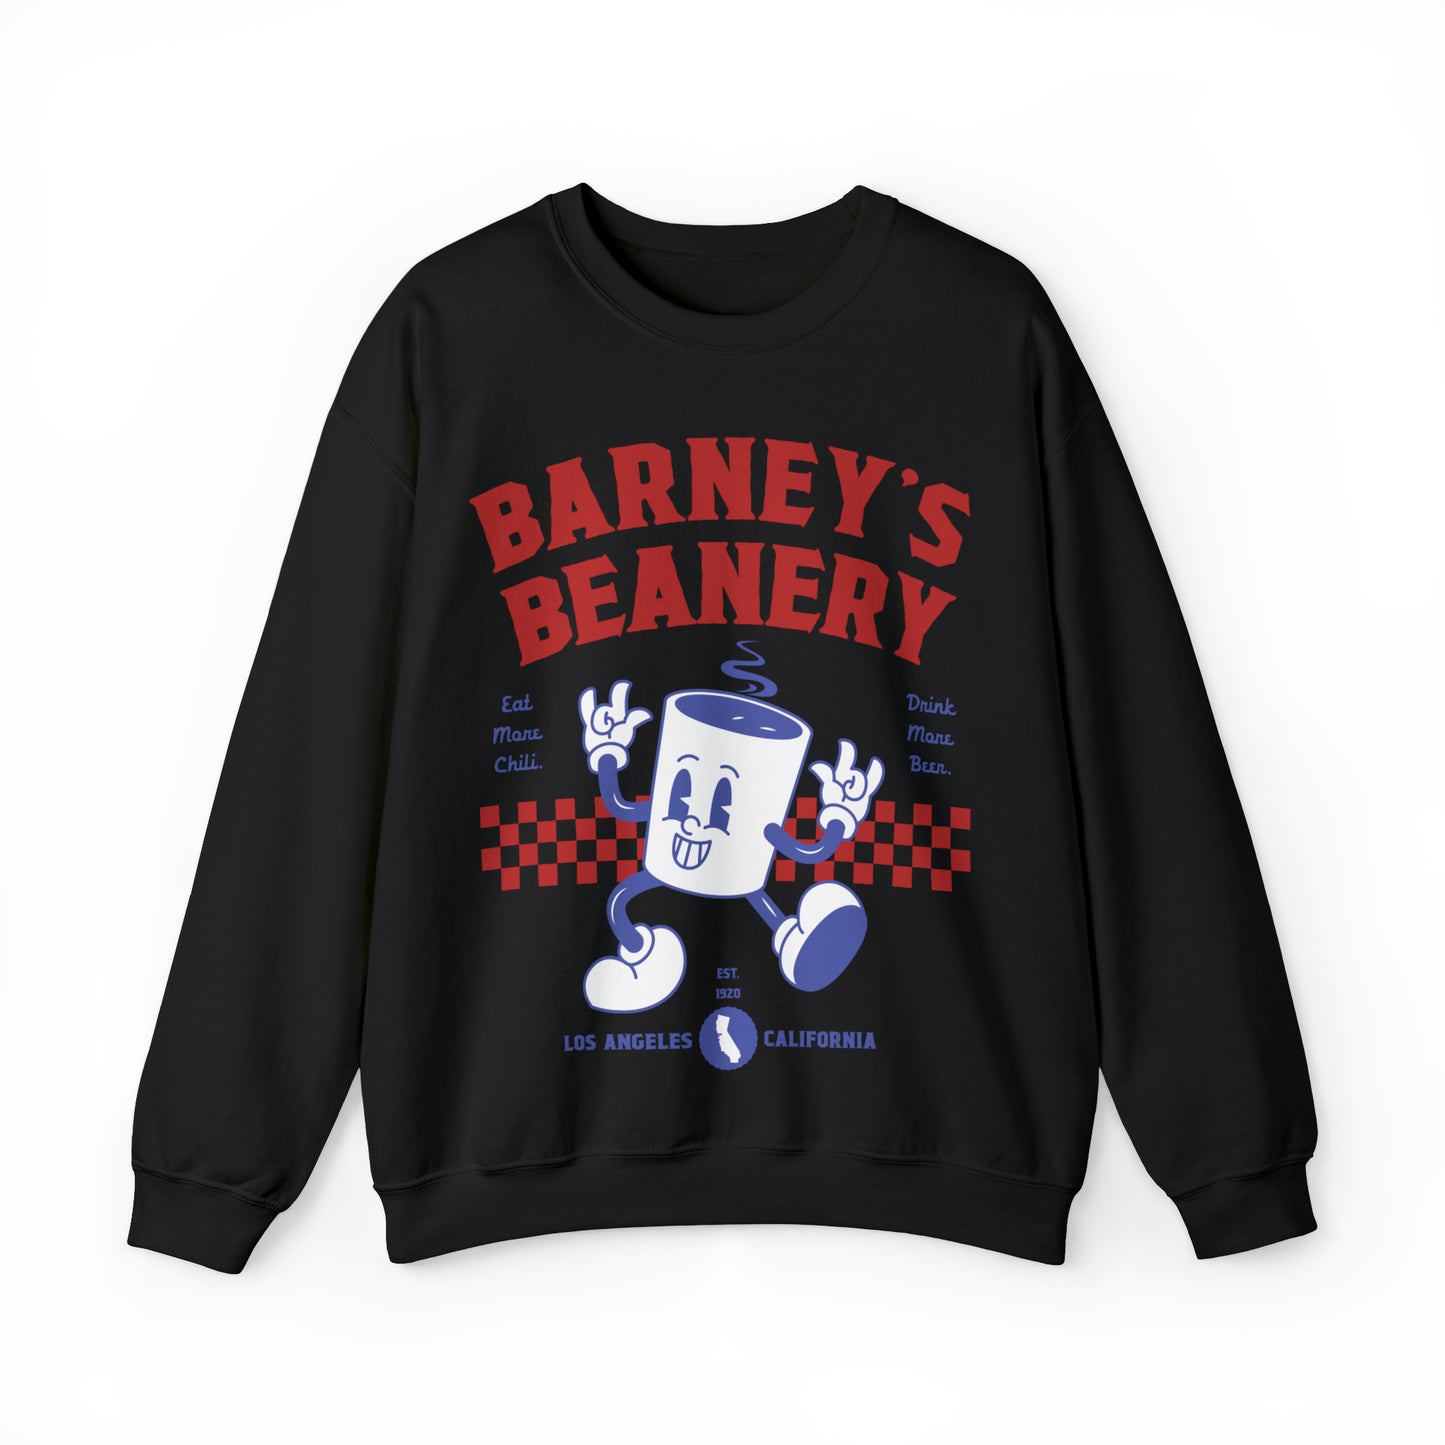 Eat More Chili. Drink More Beer. | BARNEY'S BEANERY Red & Blue - Women's Retro Graphic Sweatshirt